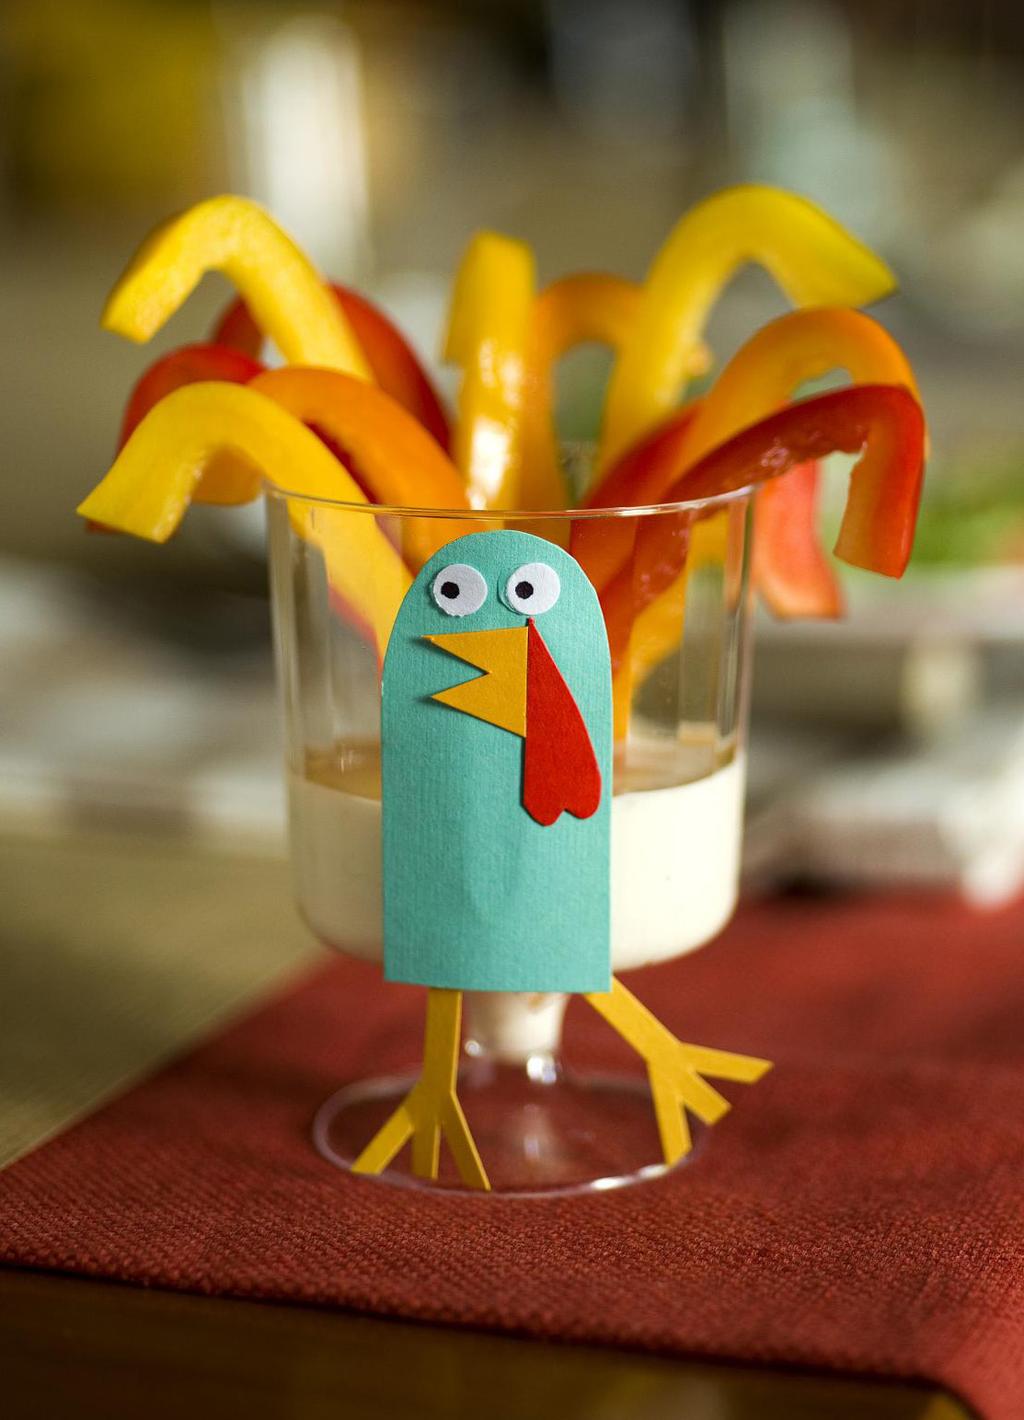 gobble me up Need a snack to tide the kids over until the big Thanksgiving feast? Here s a healthy option they can have fun making themselves.